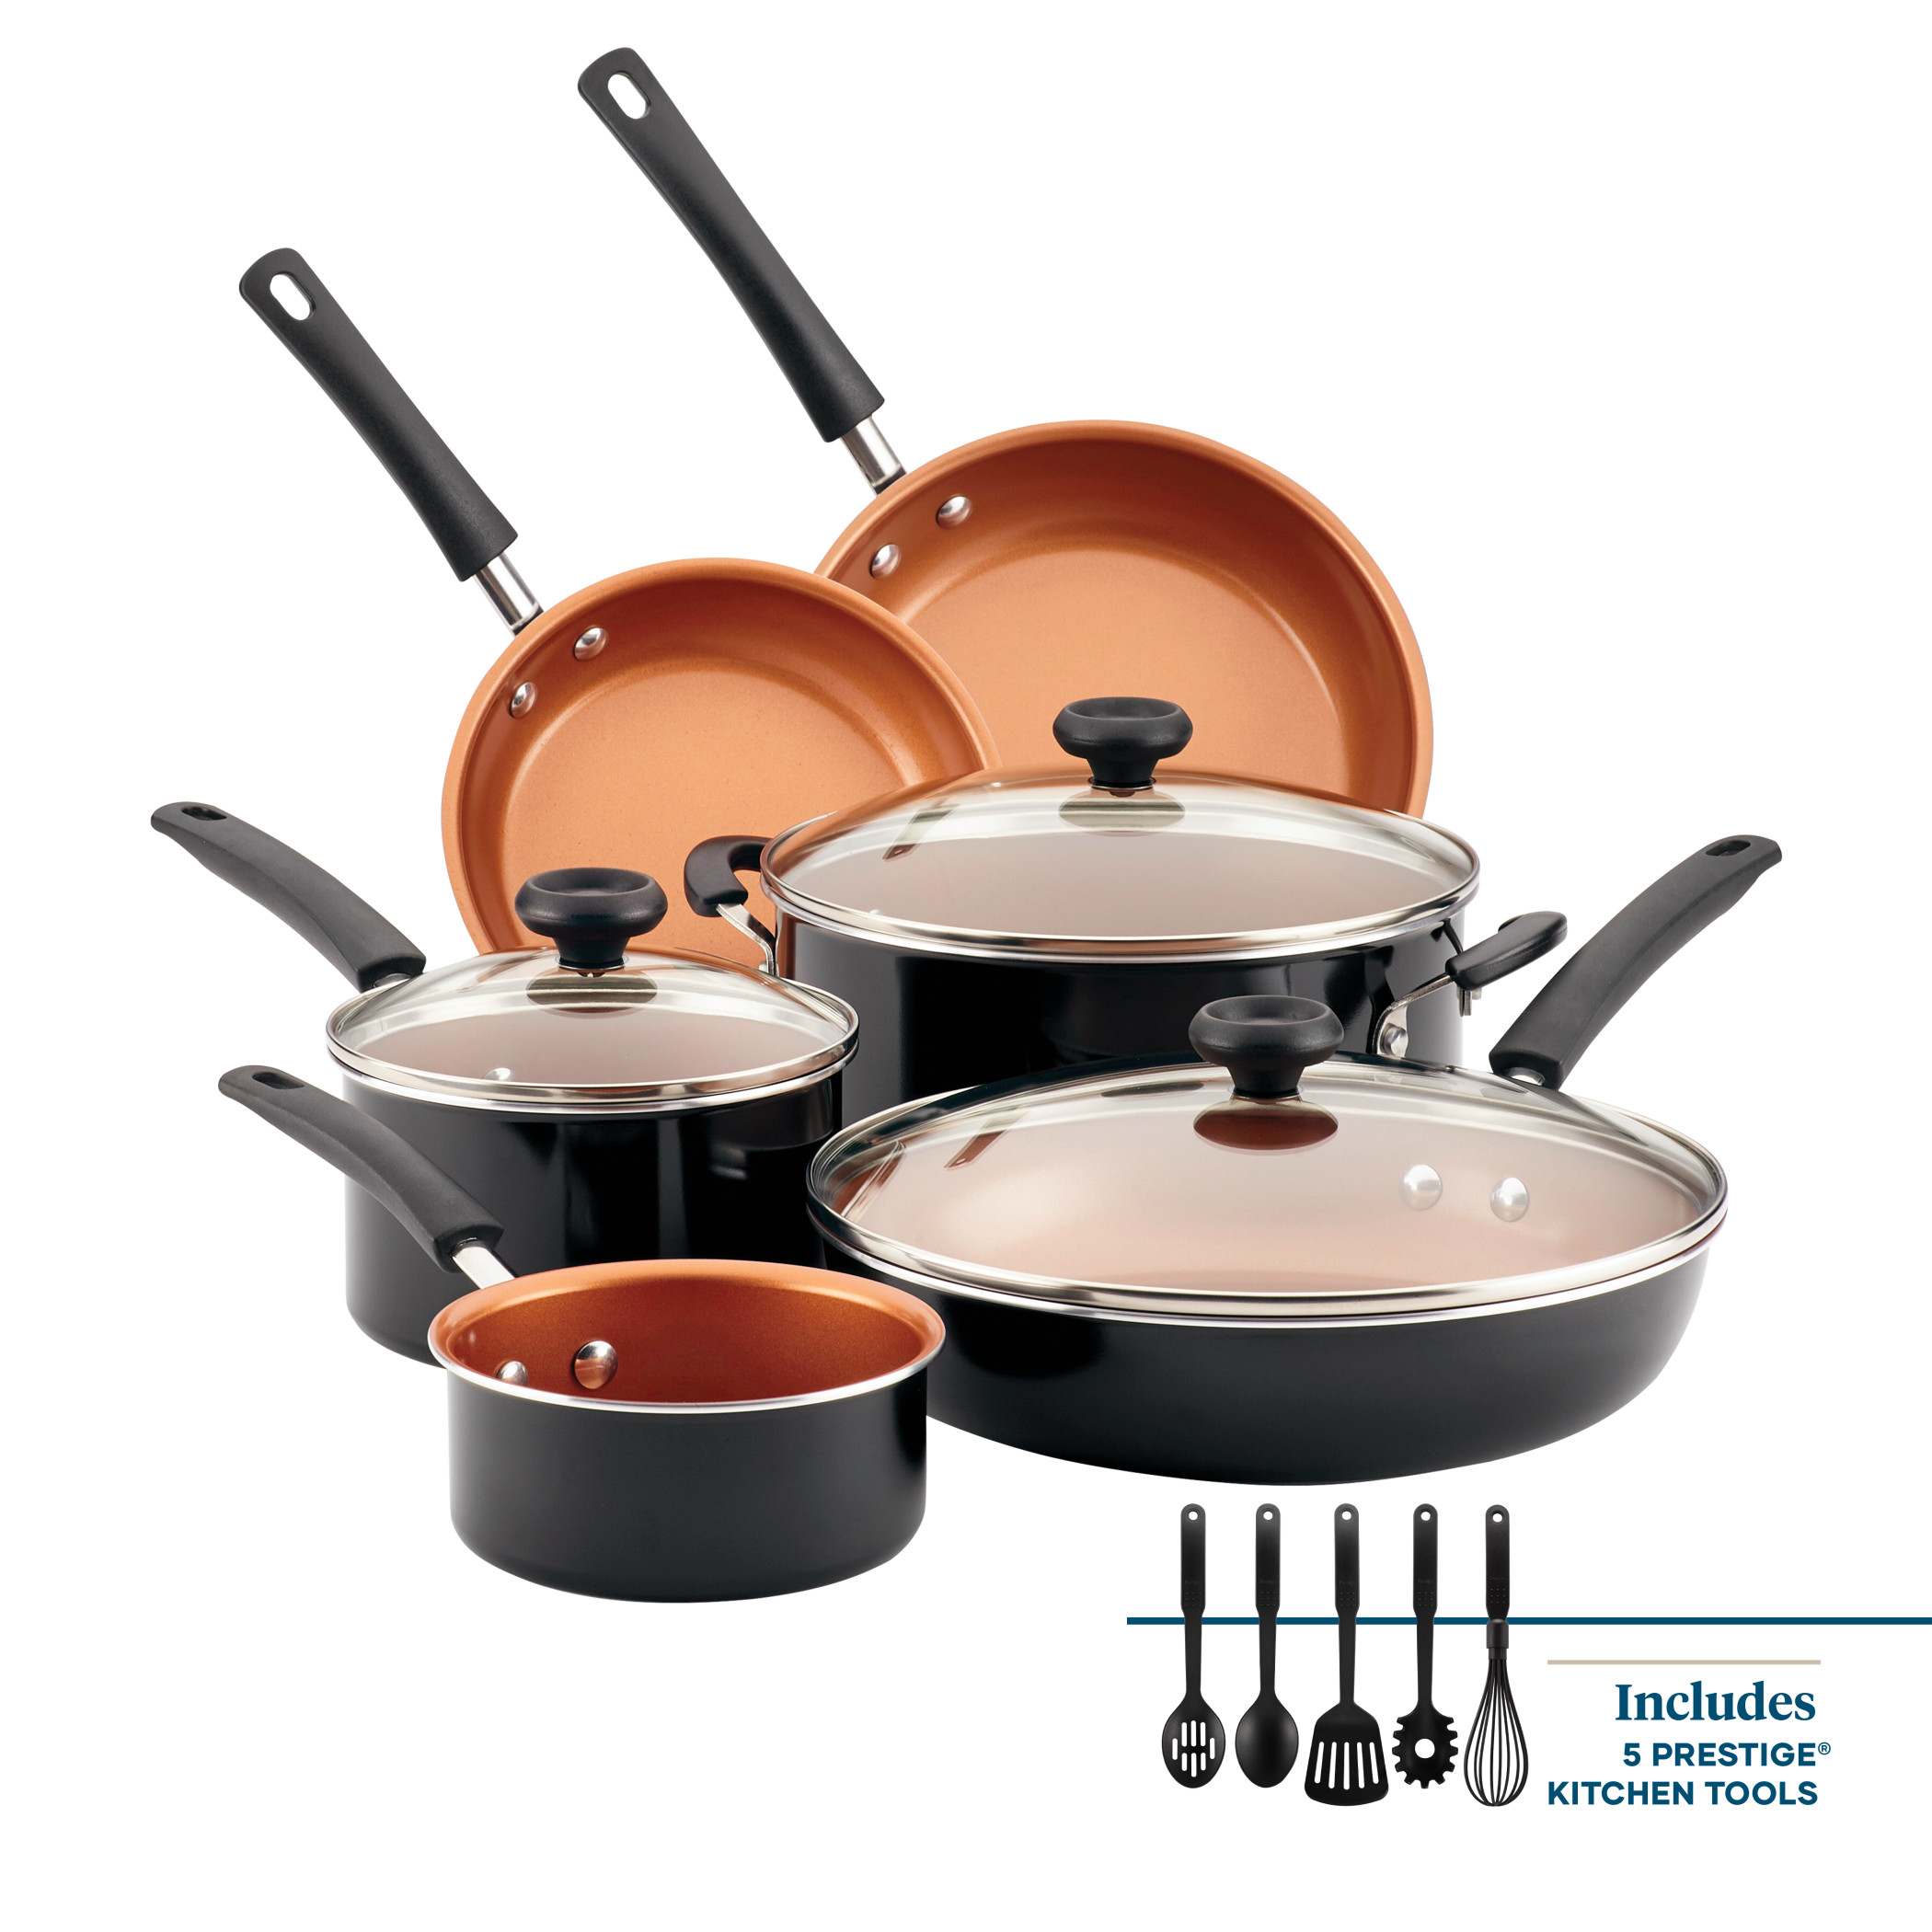 Farberware 14 Piece Easy Clean Pro Ceramic Nonstick Pots and Pans Set, Black - image 1 of 20